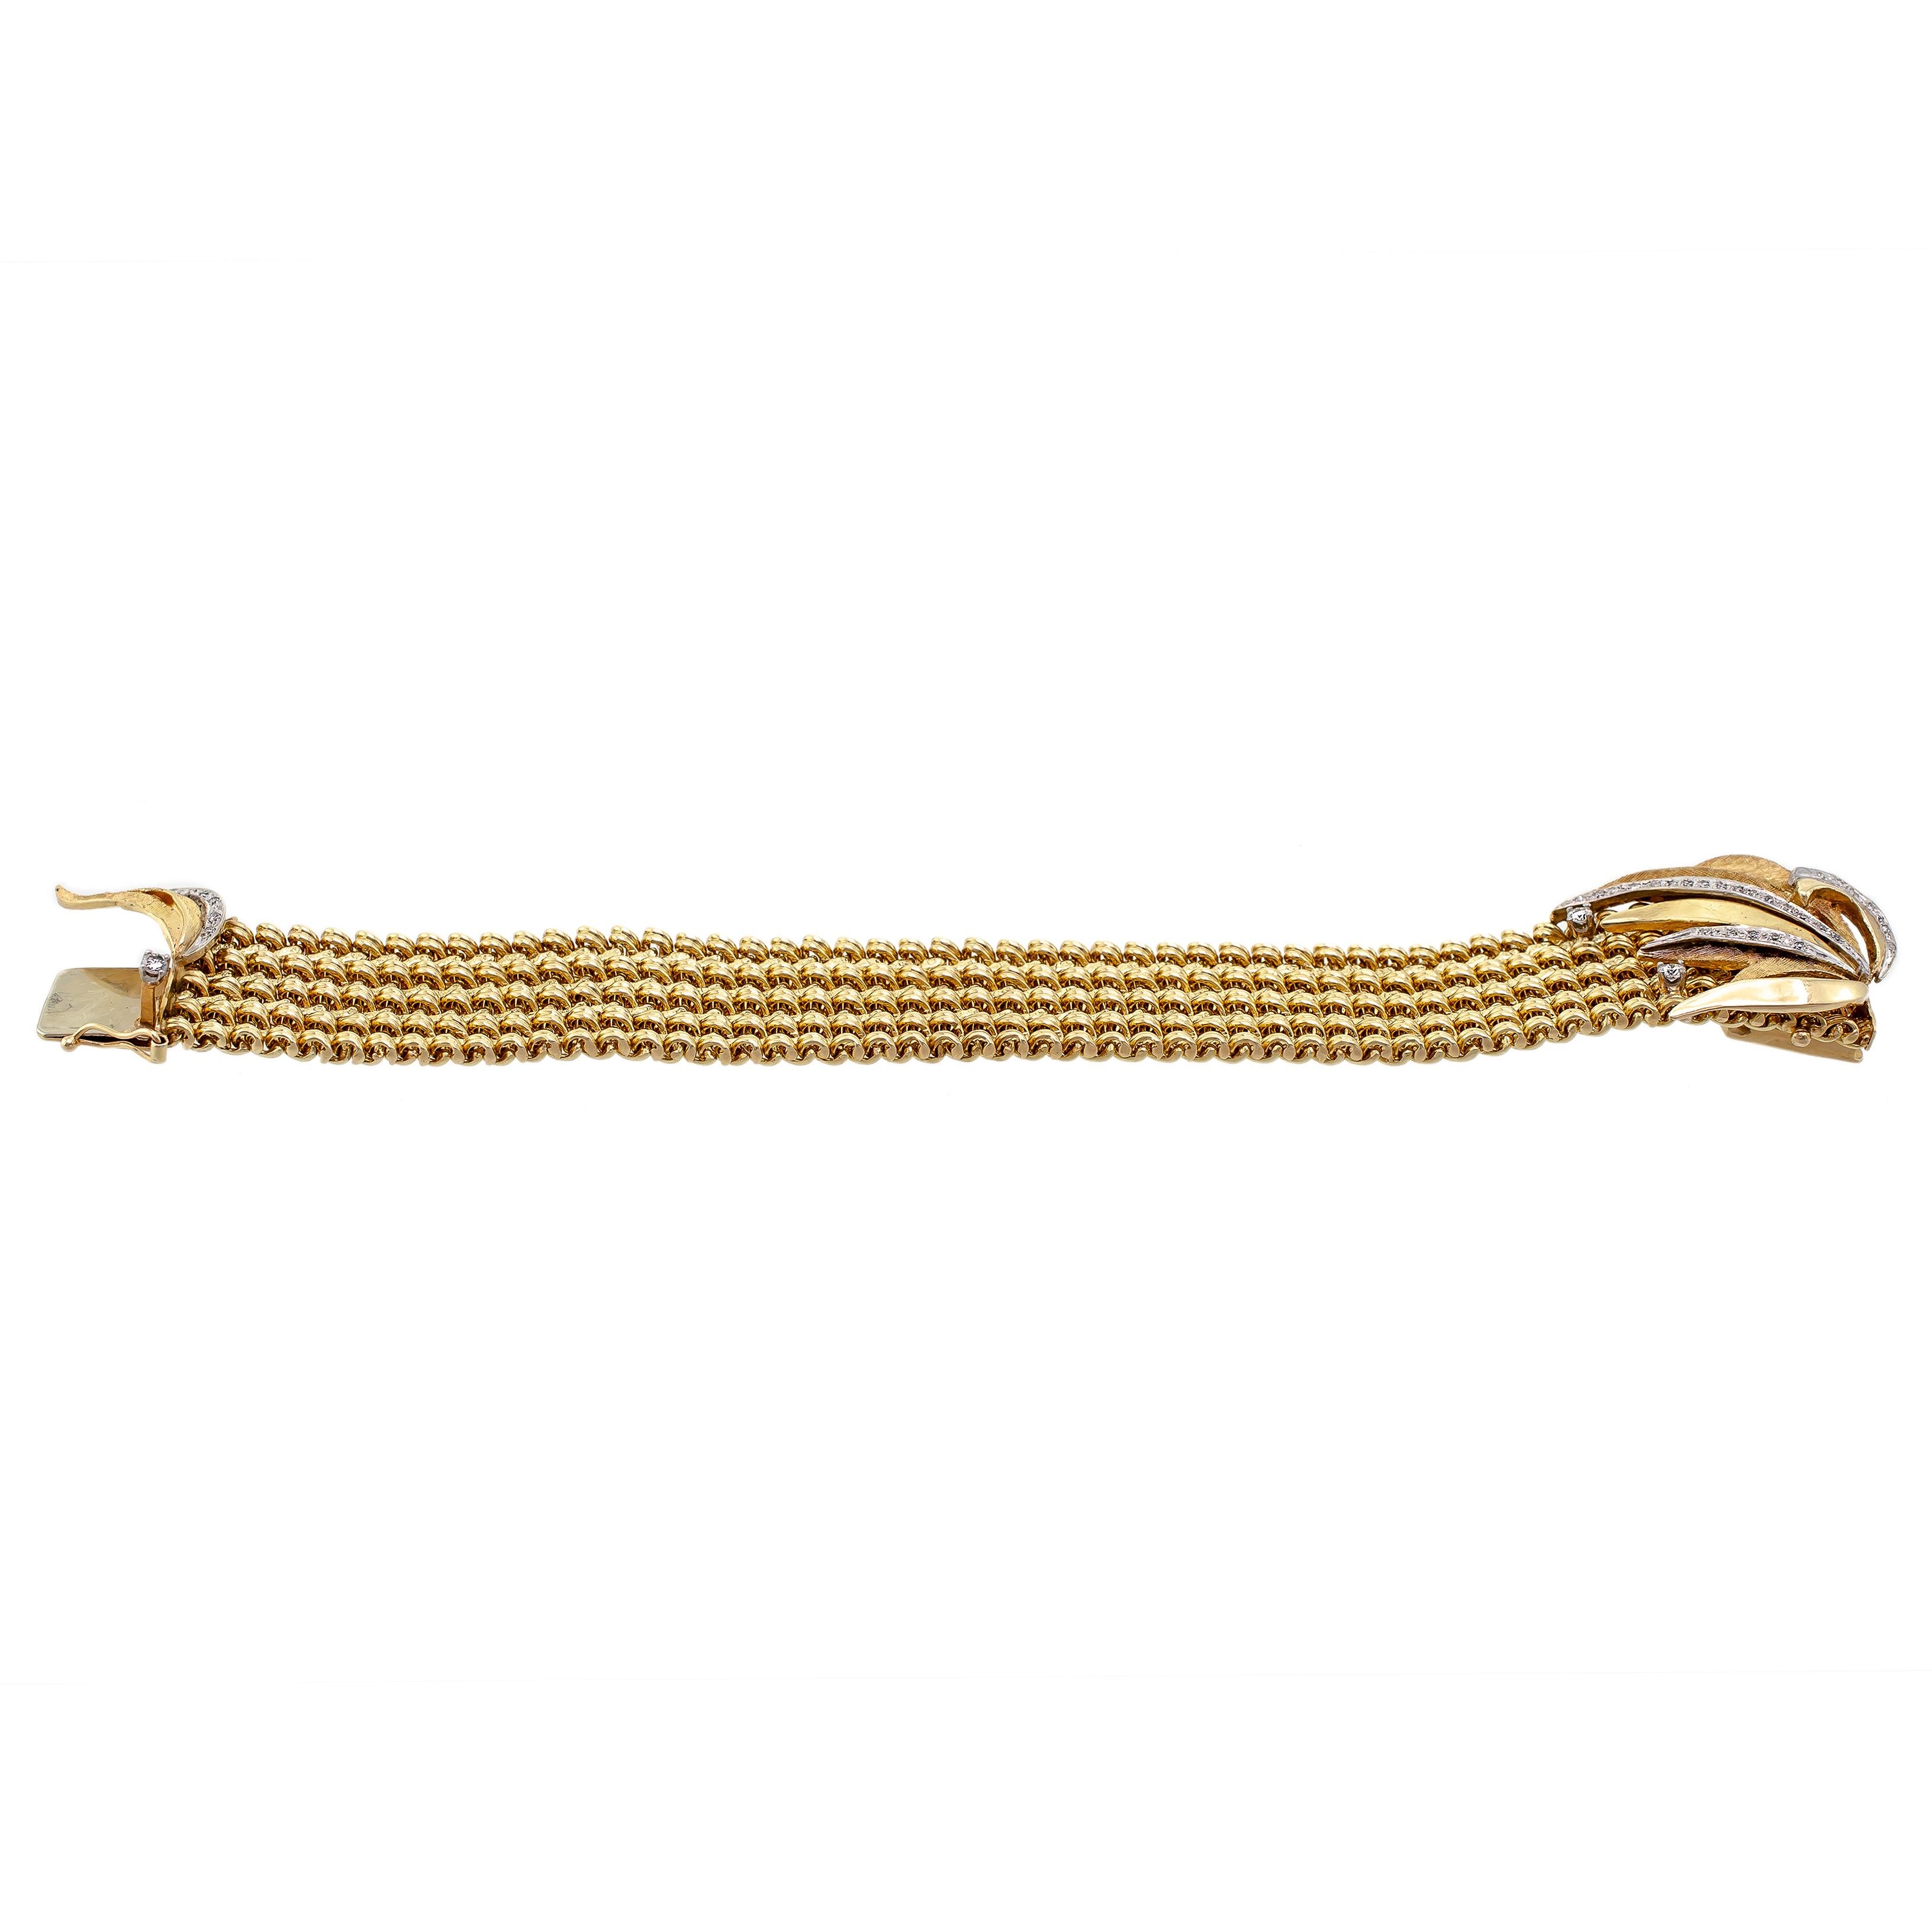 Beautiful Circa 1970 14k yellow gold and diamond spray wide flexible bracelet - sculpted floral leaf yellow gold diamond clasp set with three small round diamonds - wide heavy 14k yellow gold braided bracelet - hidden clasp - length 6 3/4